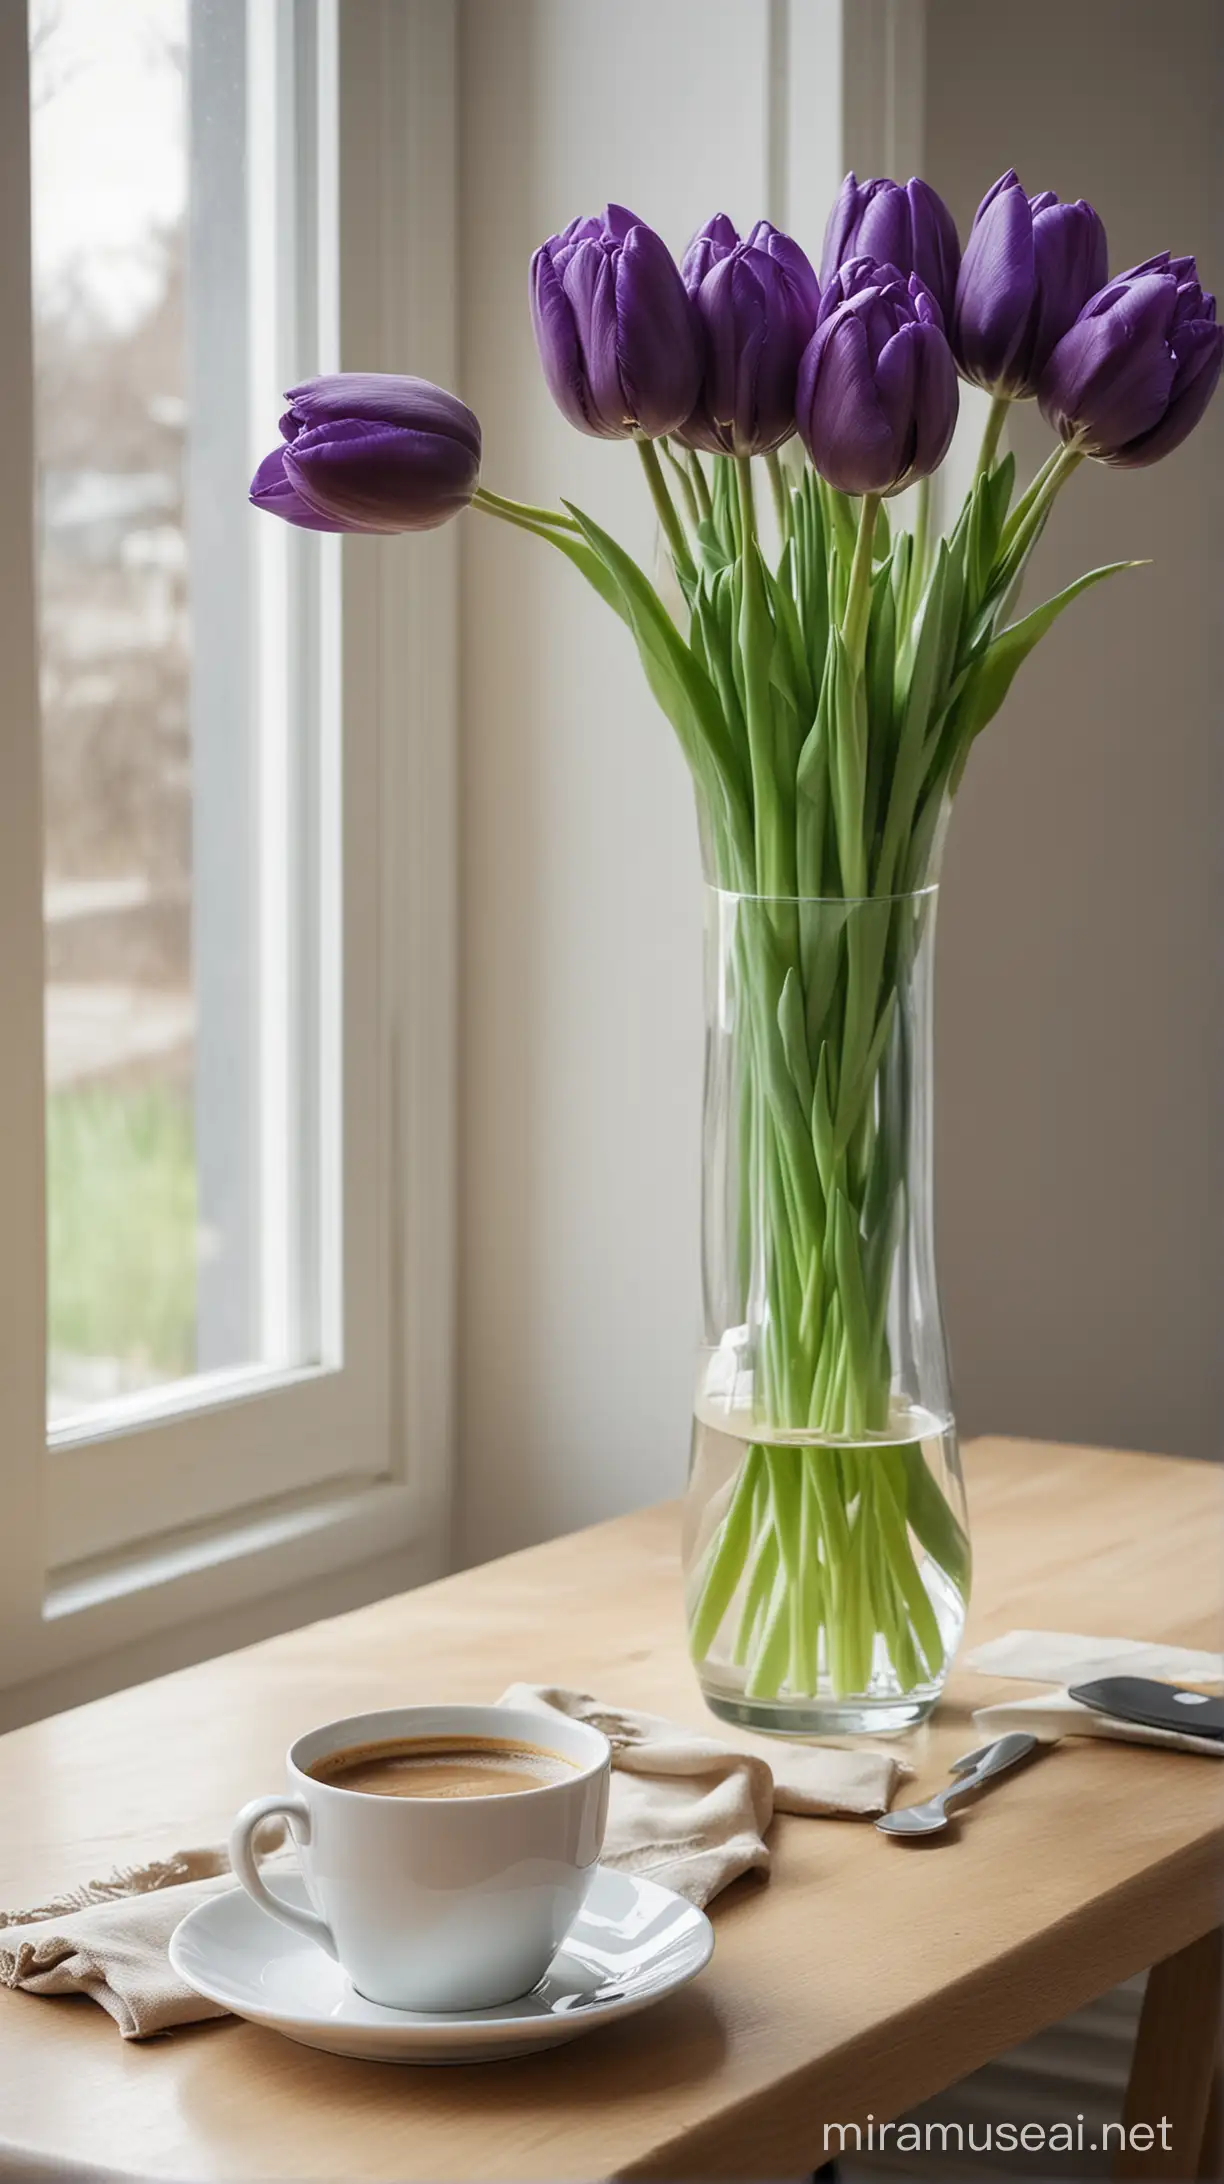 Purple Tulips in Vase on Table with Coffee Cup